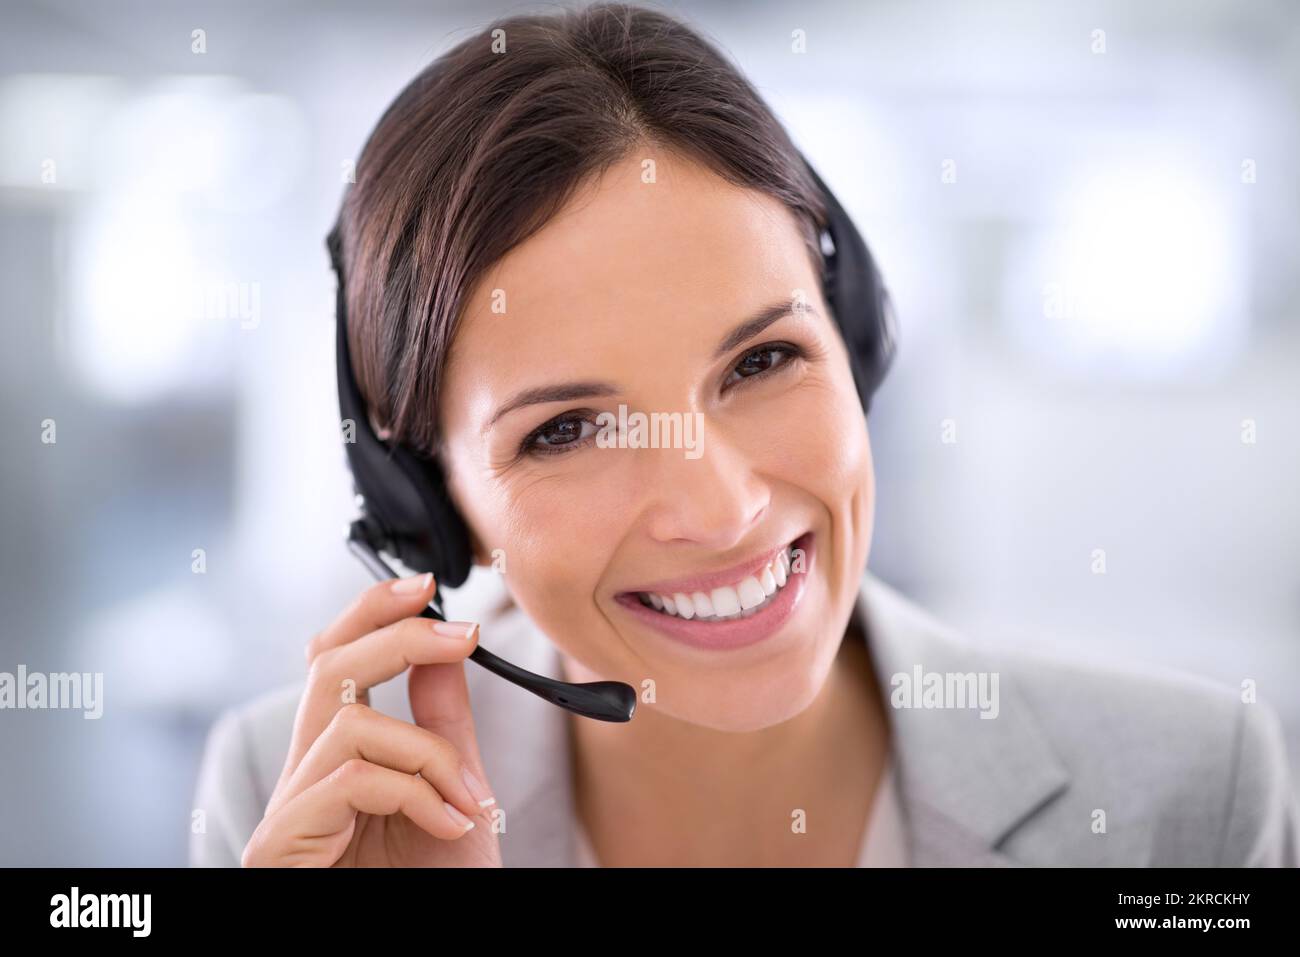 She goes the extra mile for her clients. an attractive customer support agent. Stock Photo